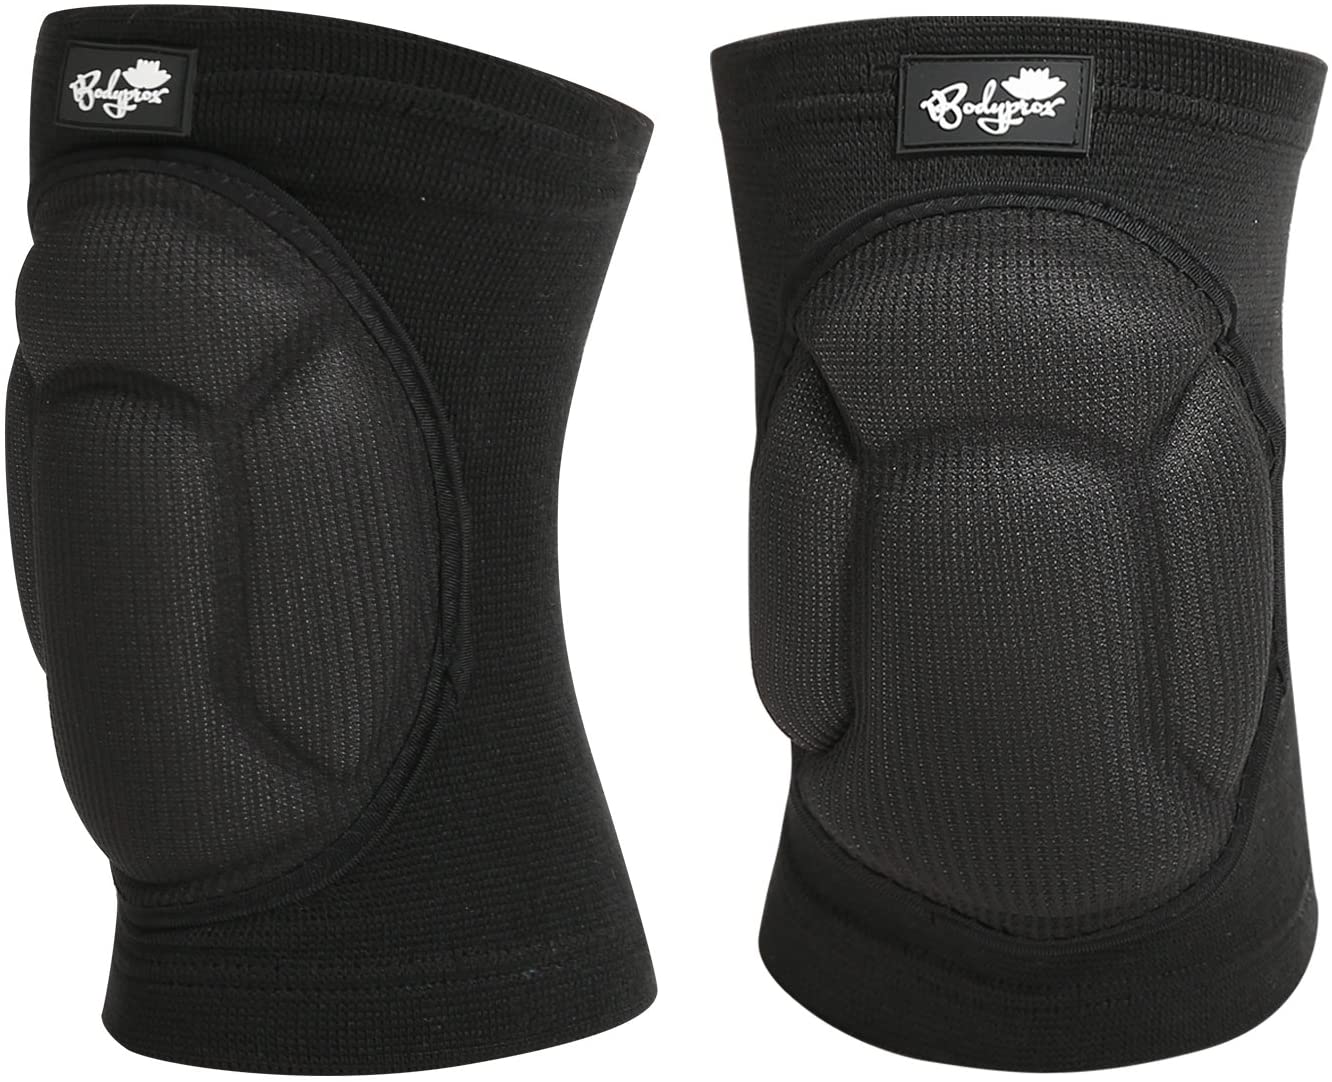 Protective Knee Pads, Thick Sponge Anti-Slip, Collision Avoidance Knee Sleeve - e4cents